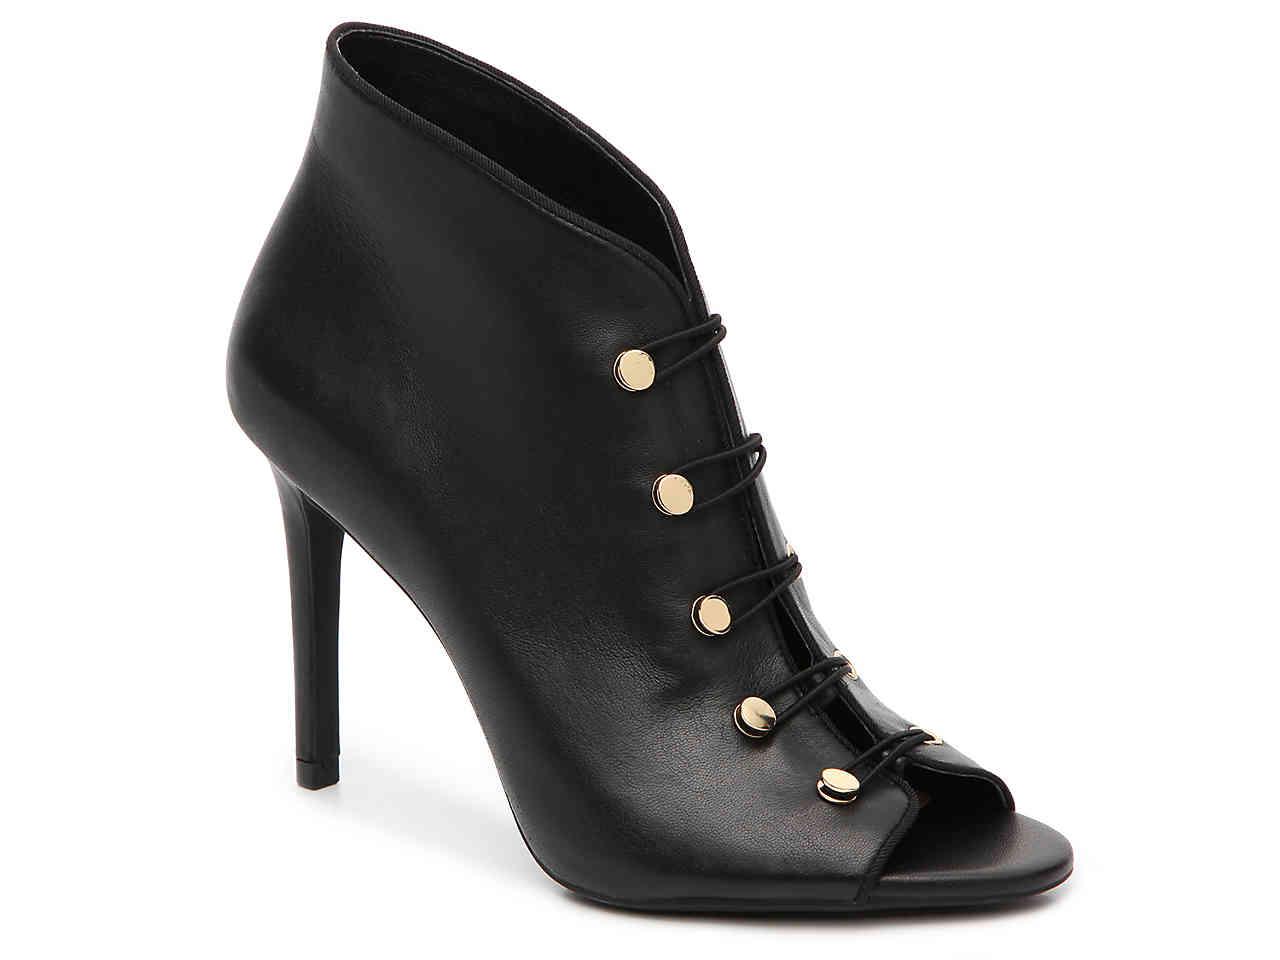 Enzo Angiolini Leather Franses Bootie in Black - Lyst